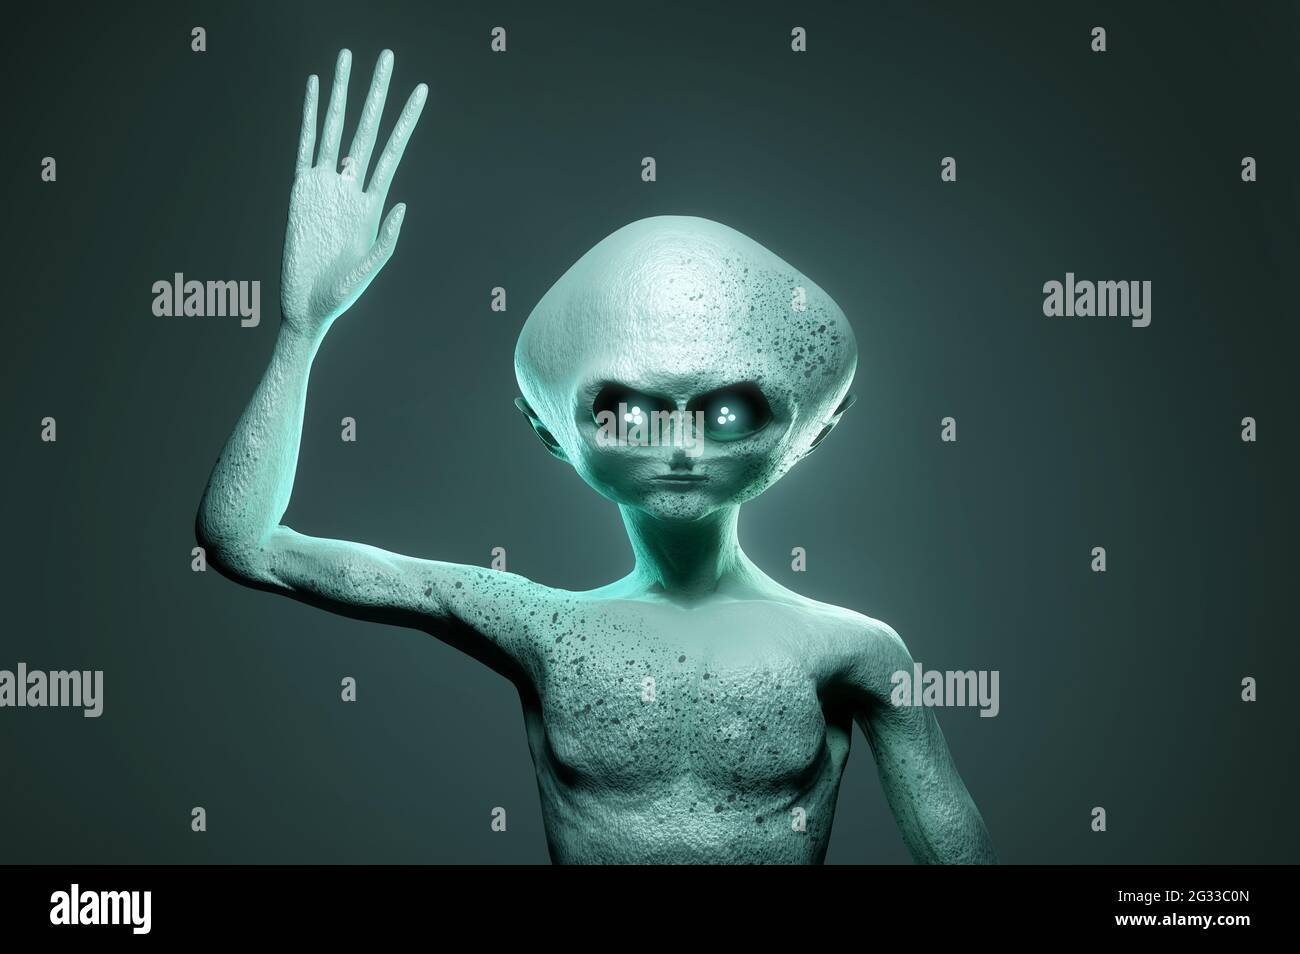 Portrait of a extraterrestrial alien life form waving. 3D illustration. Stock Photo